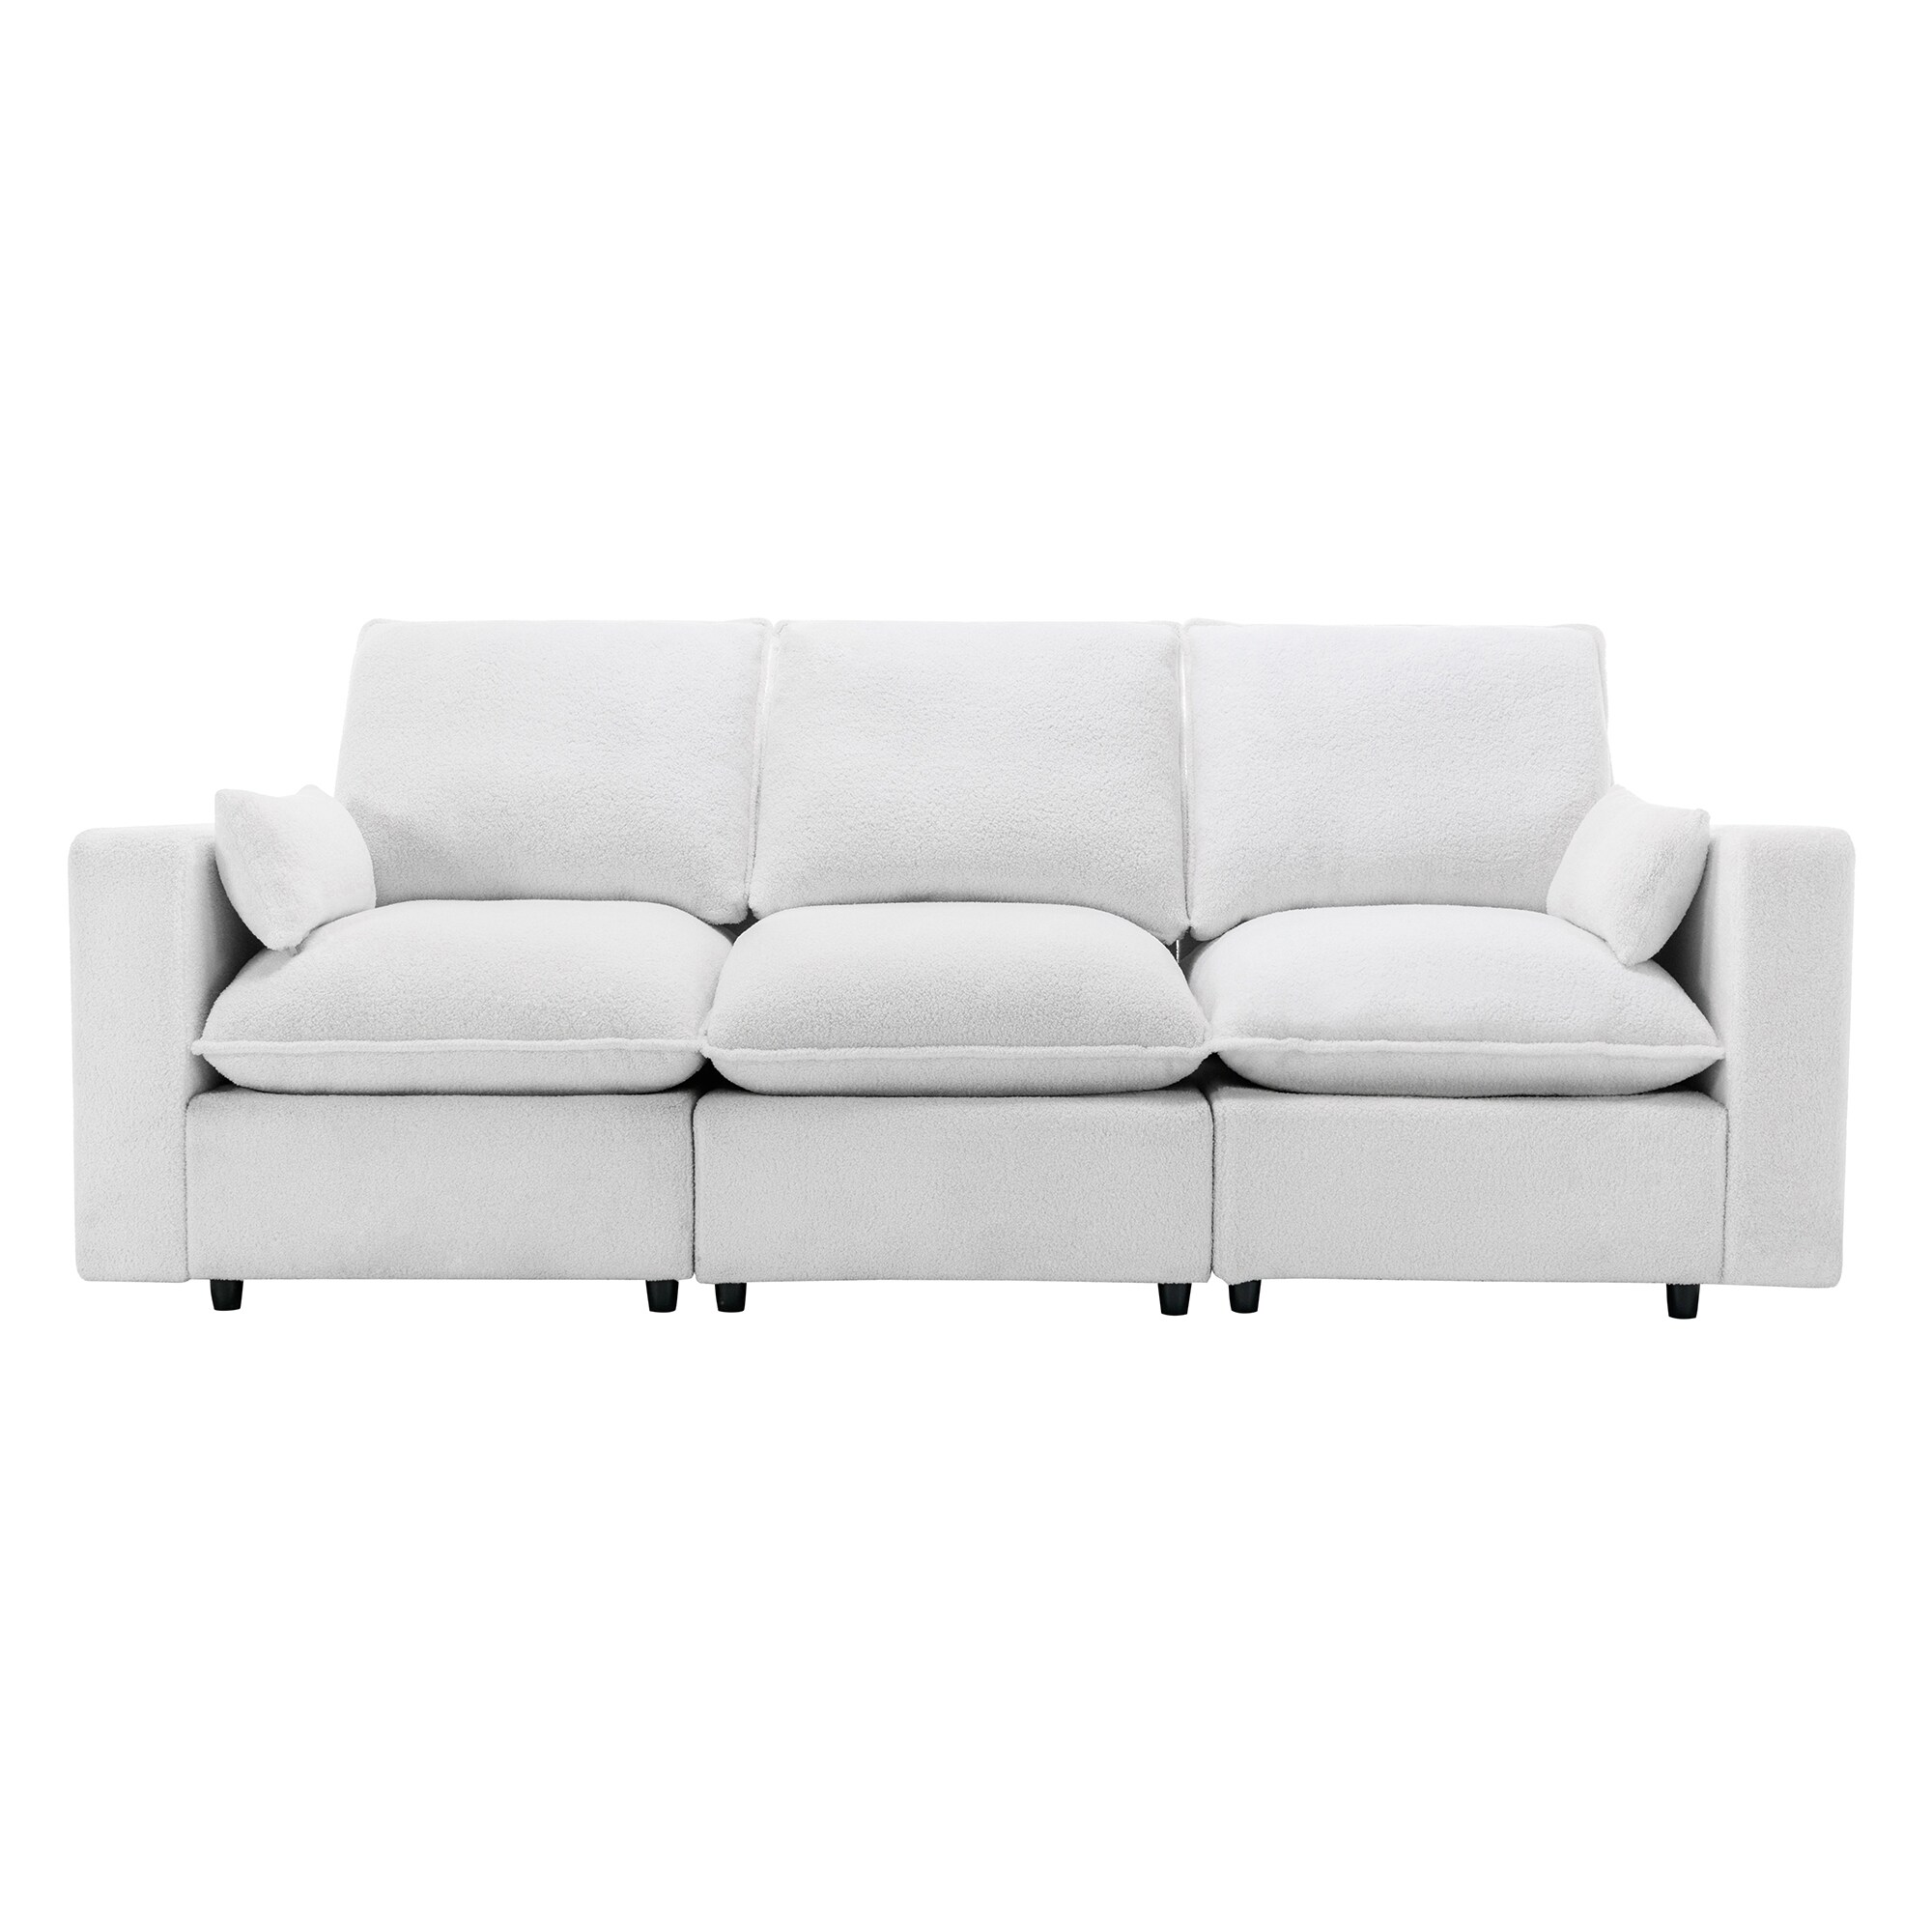 https://ak1.ostkcdn.com/images/products/is/images/direct/94927a272334c54eef662eabd9a872f20812db01/Teddy-Fabric-3-Seater-Sofa-Removable-Back-and-Seat-Cushions-Couch-with-2-Throw-Pillows-and-Square-Arms-for-Living-Room-Sofa.jpg